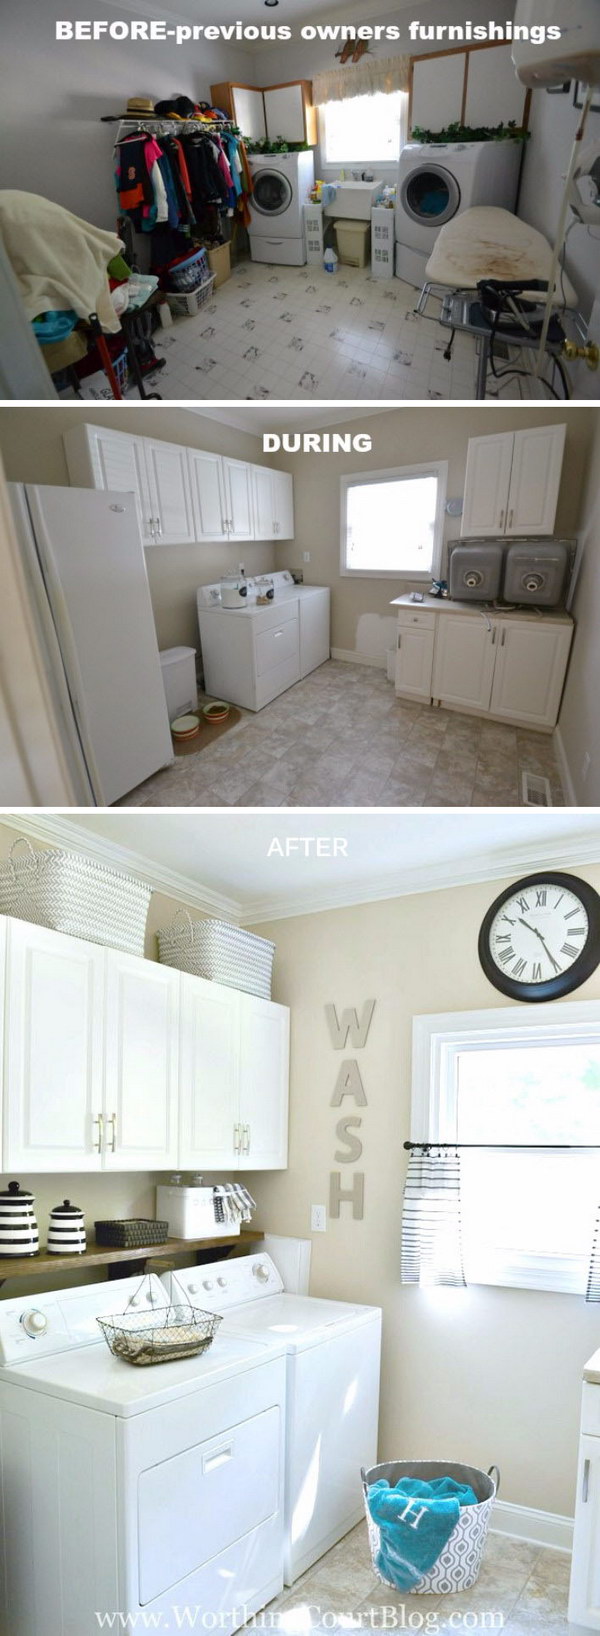 Reveal laundry room with farmhouse and rustic touches: From chaotic to neat and organized. 